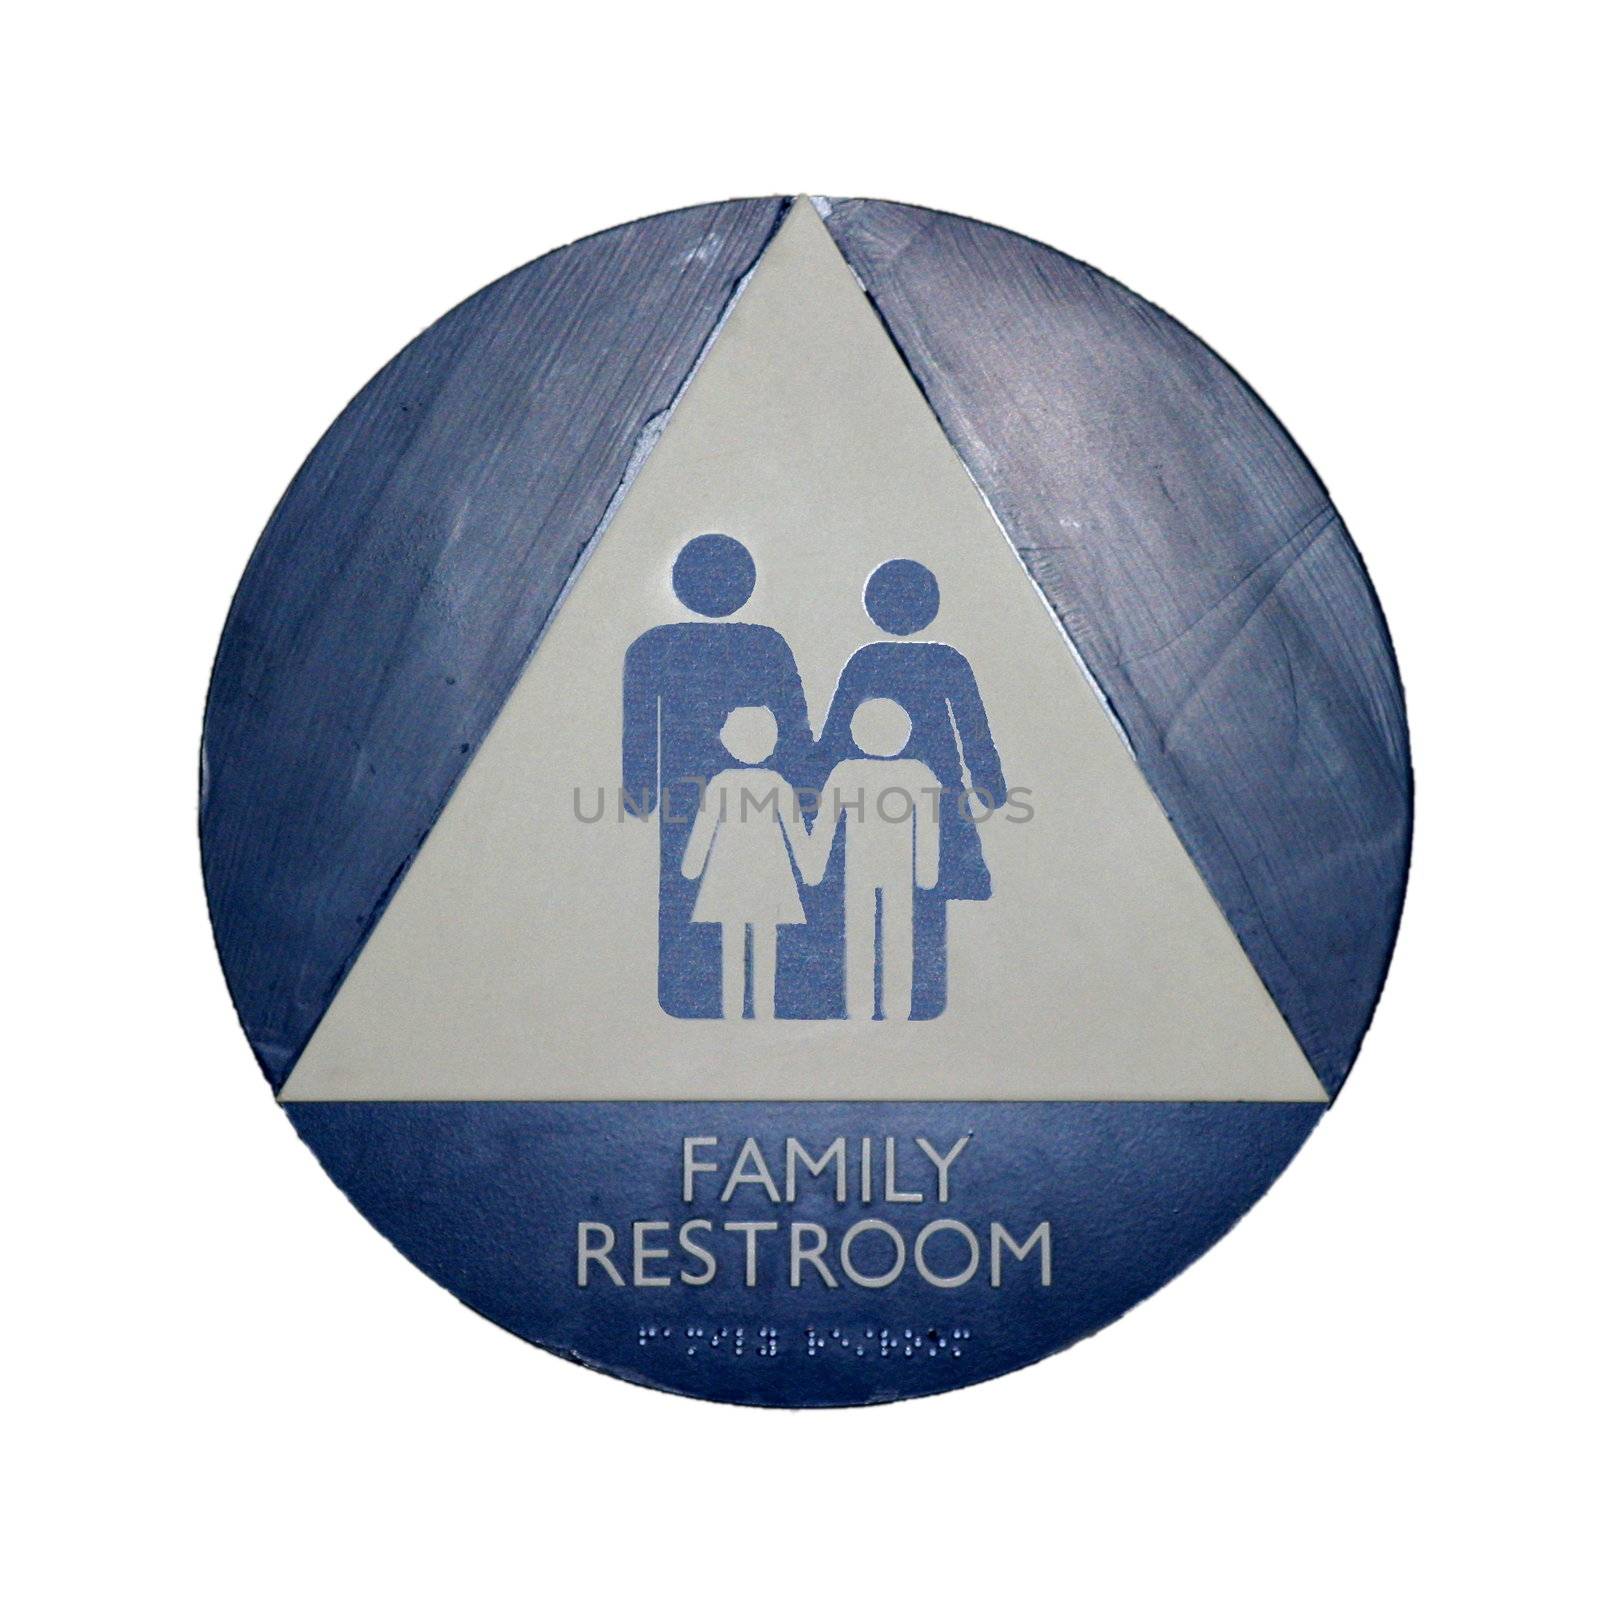 A blue, white, and gray restroom sign for families